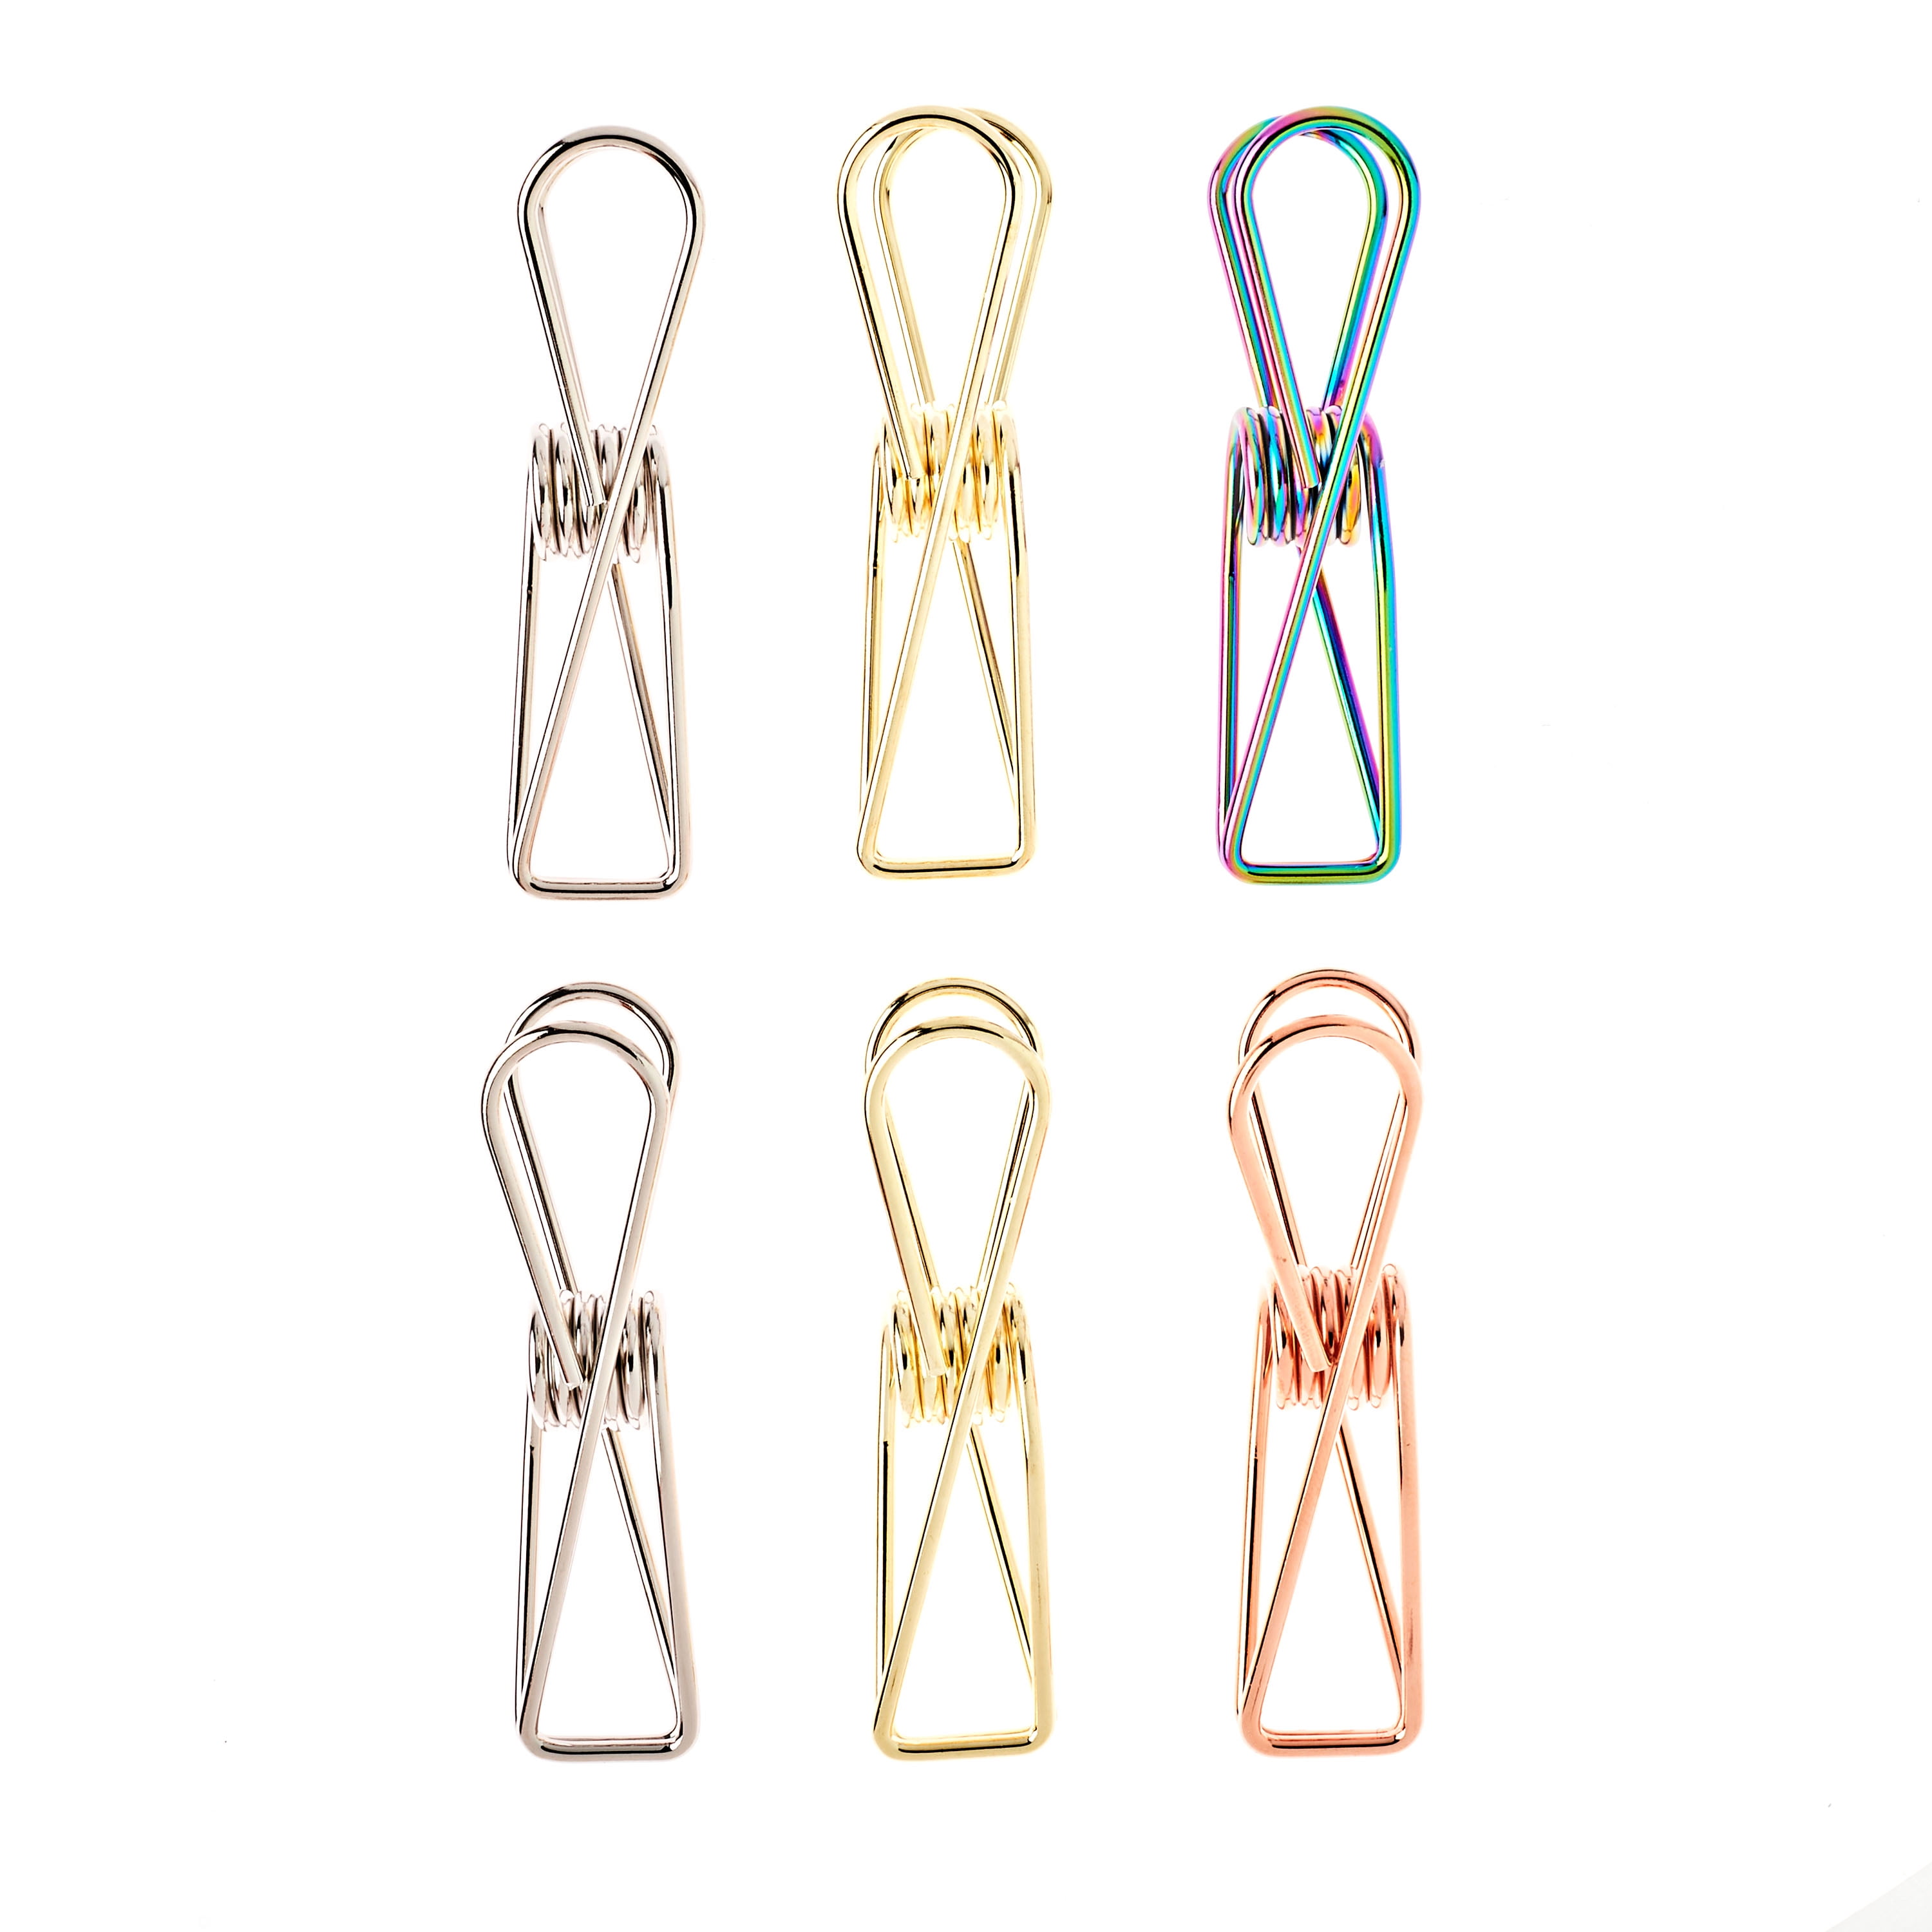  Clips Hollow Wire Clip Sealing Small Clip Clothes Hanger Clip  Pants Clip Spring Clip Metal 20Pcs Strong Metallic Little Petite Metalware  Tiny Clamps (Blue) : Home & Kitchen